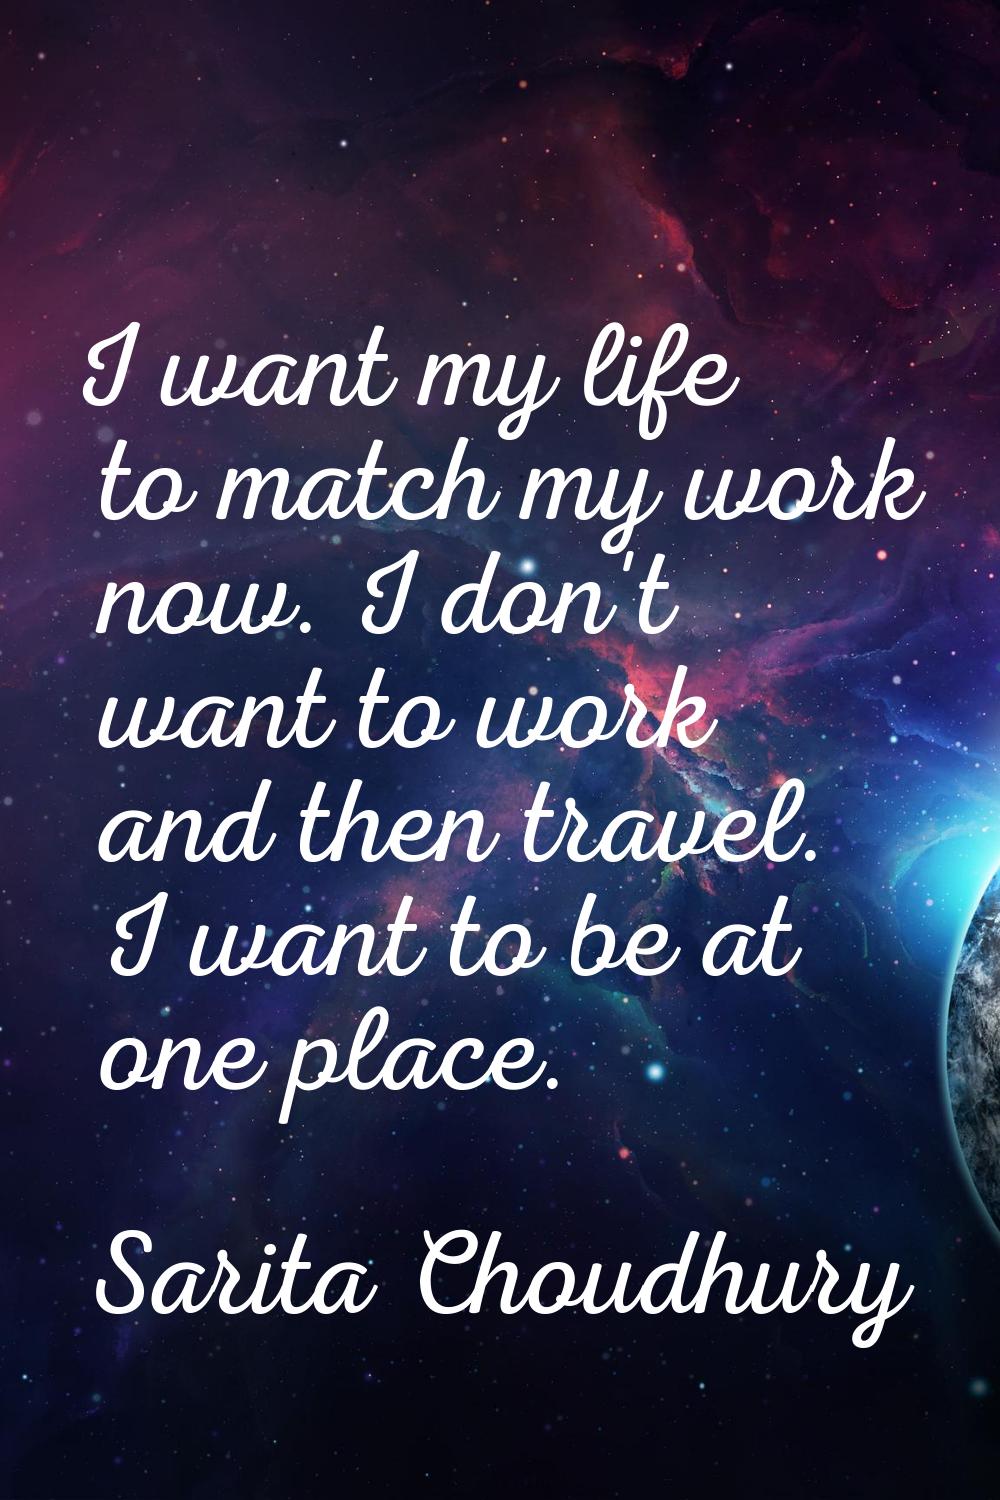 I want my life to match my work now. I don't want to work and then travel. I want to be at one plac